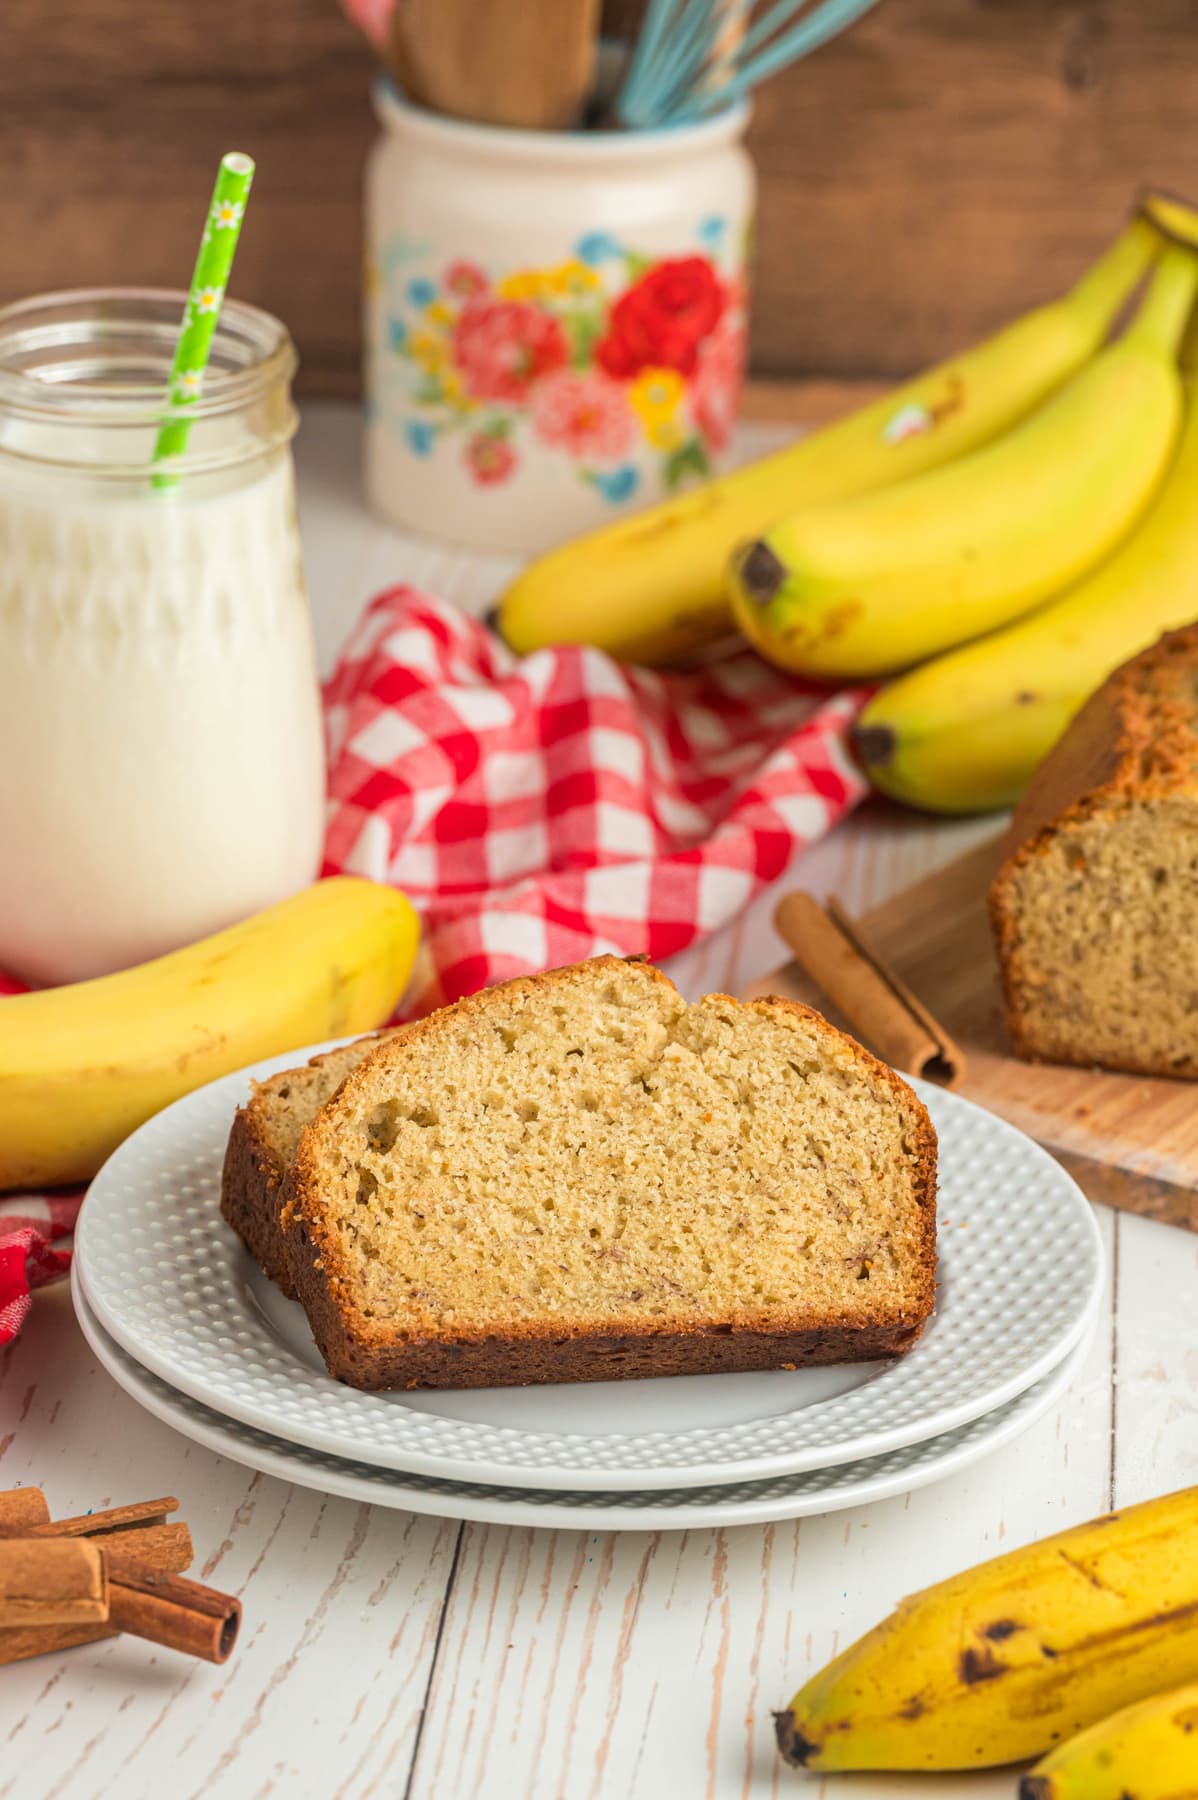 A slice of banana bread on a plate